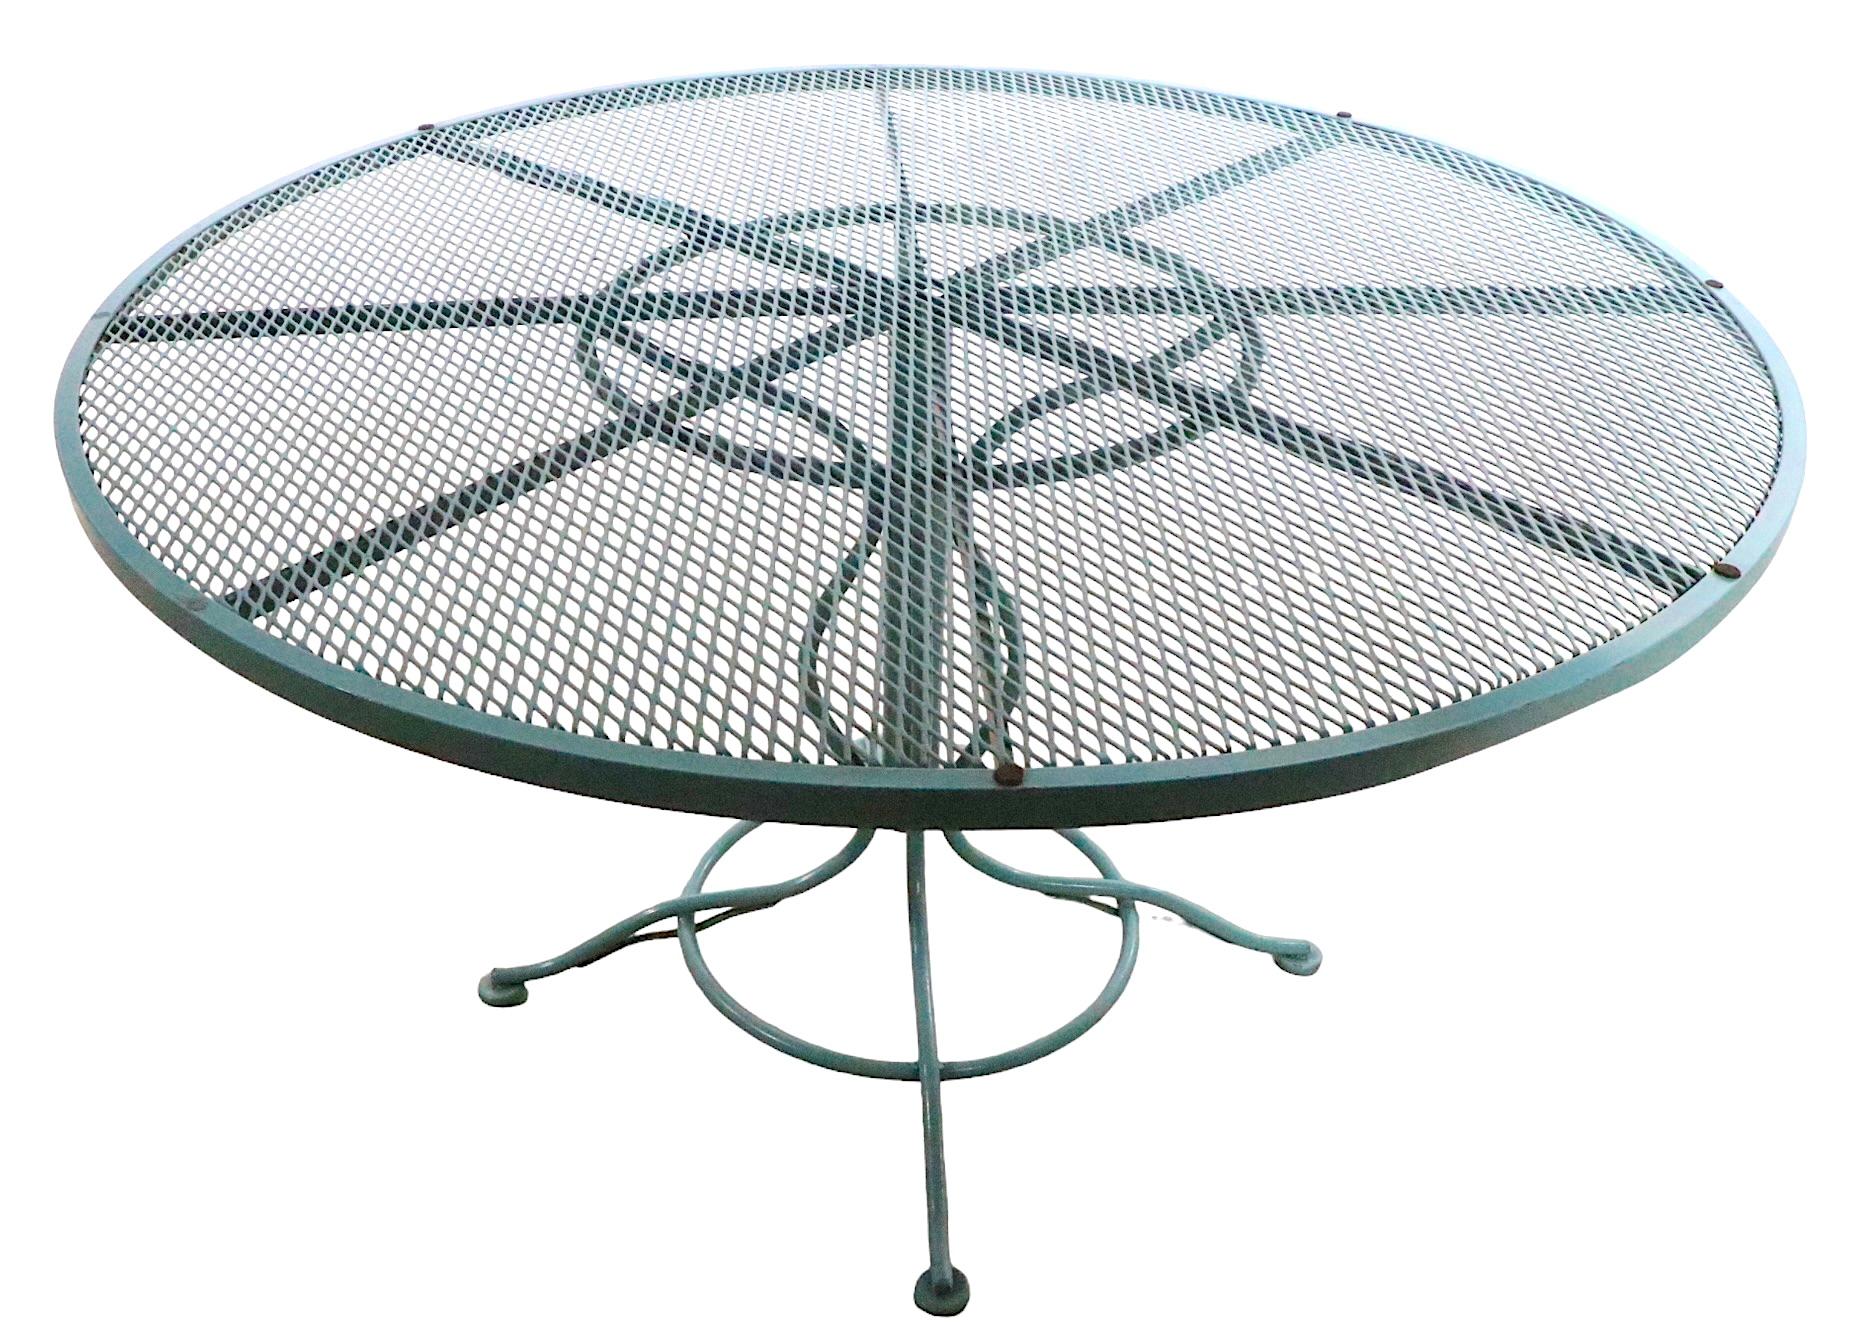 Wrought Iron and Metal Mesh Garden Patio Sculptura Dining Table by Woodard  For Sale 4